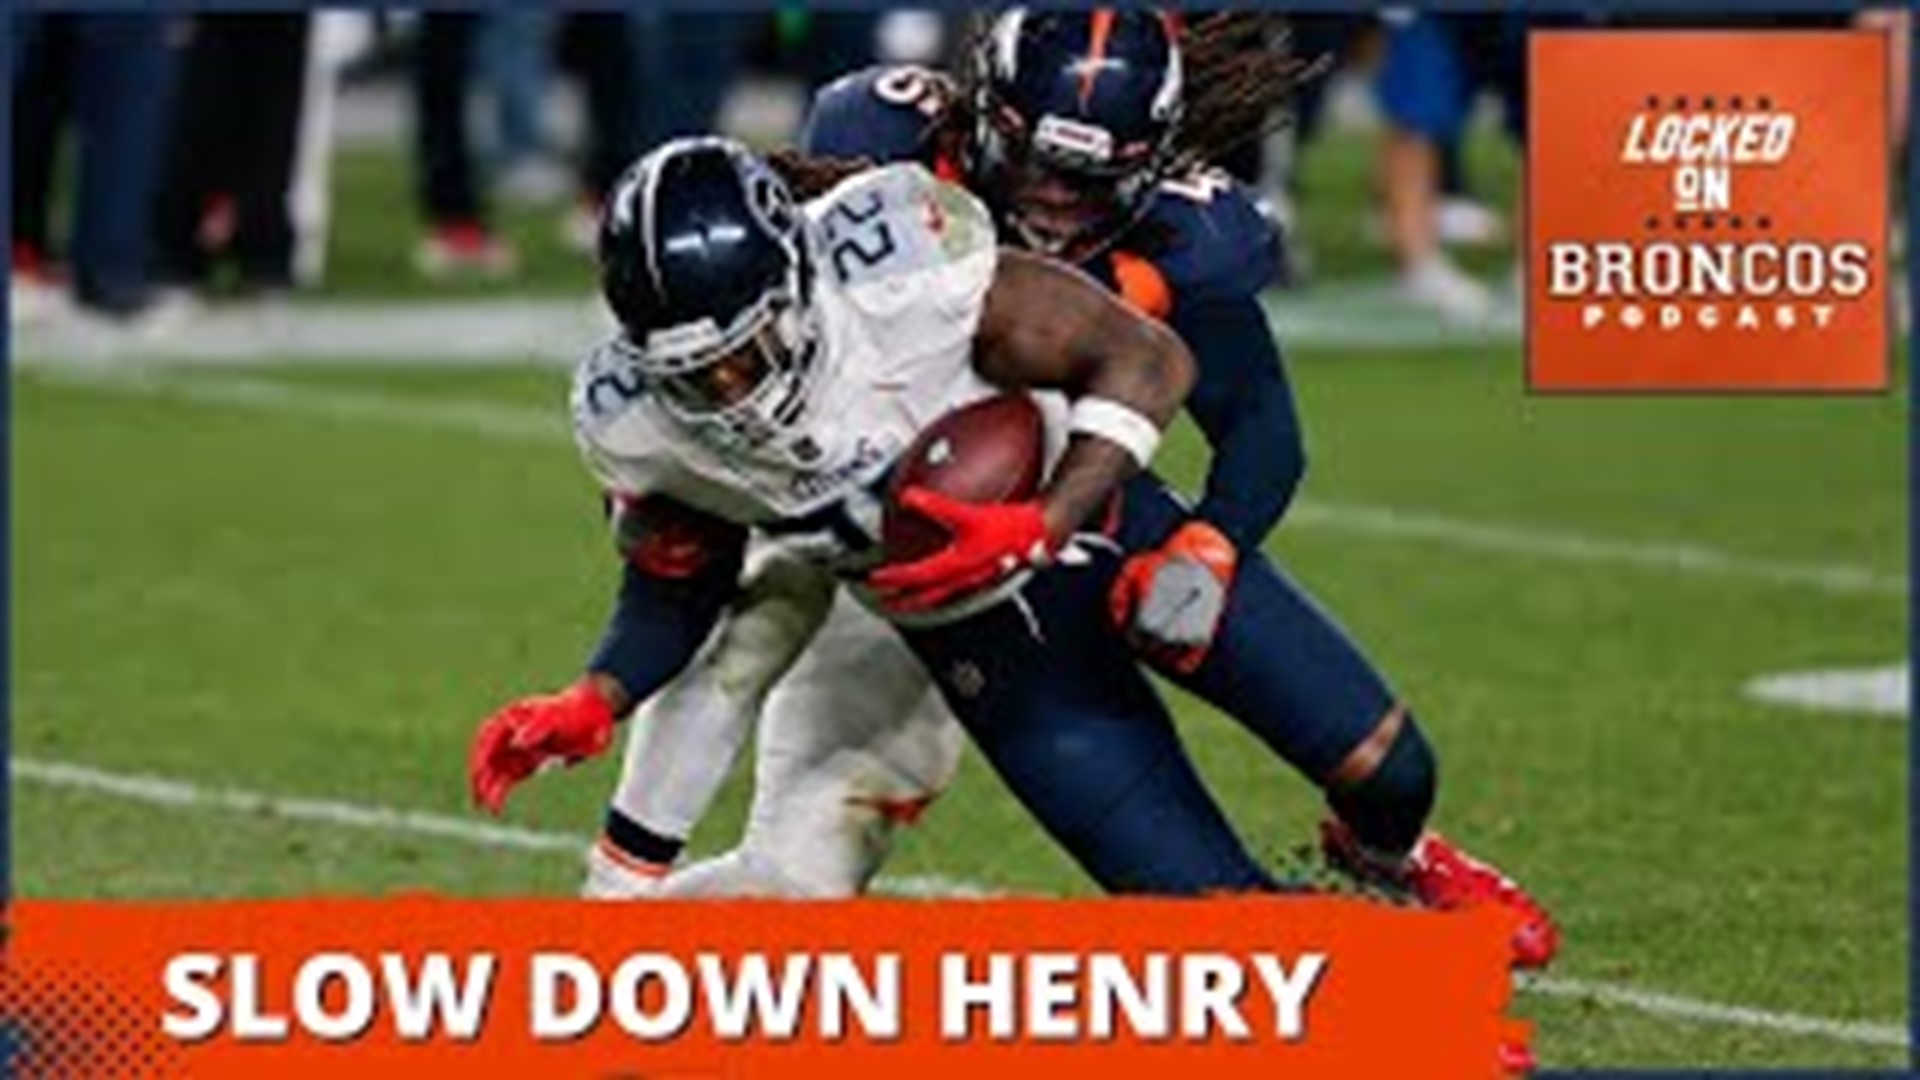 The Denver Broncos defense is looking to slow down Tennessee Titans running back Derrick Henry on Sunday.